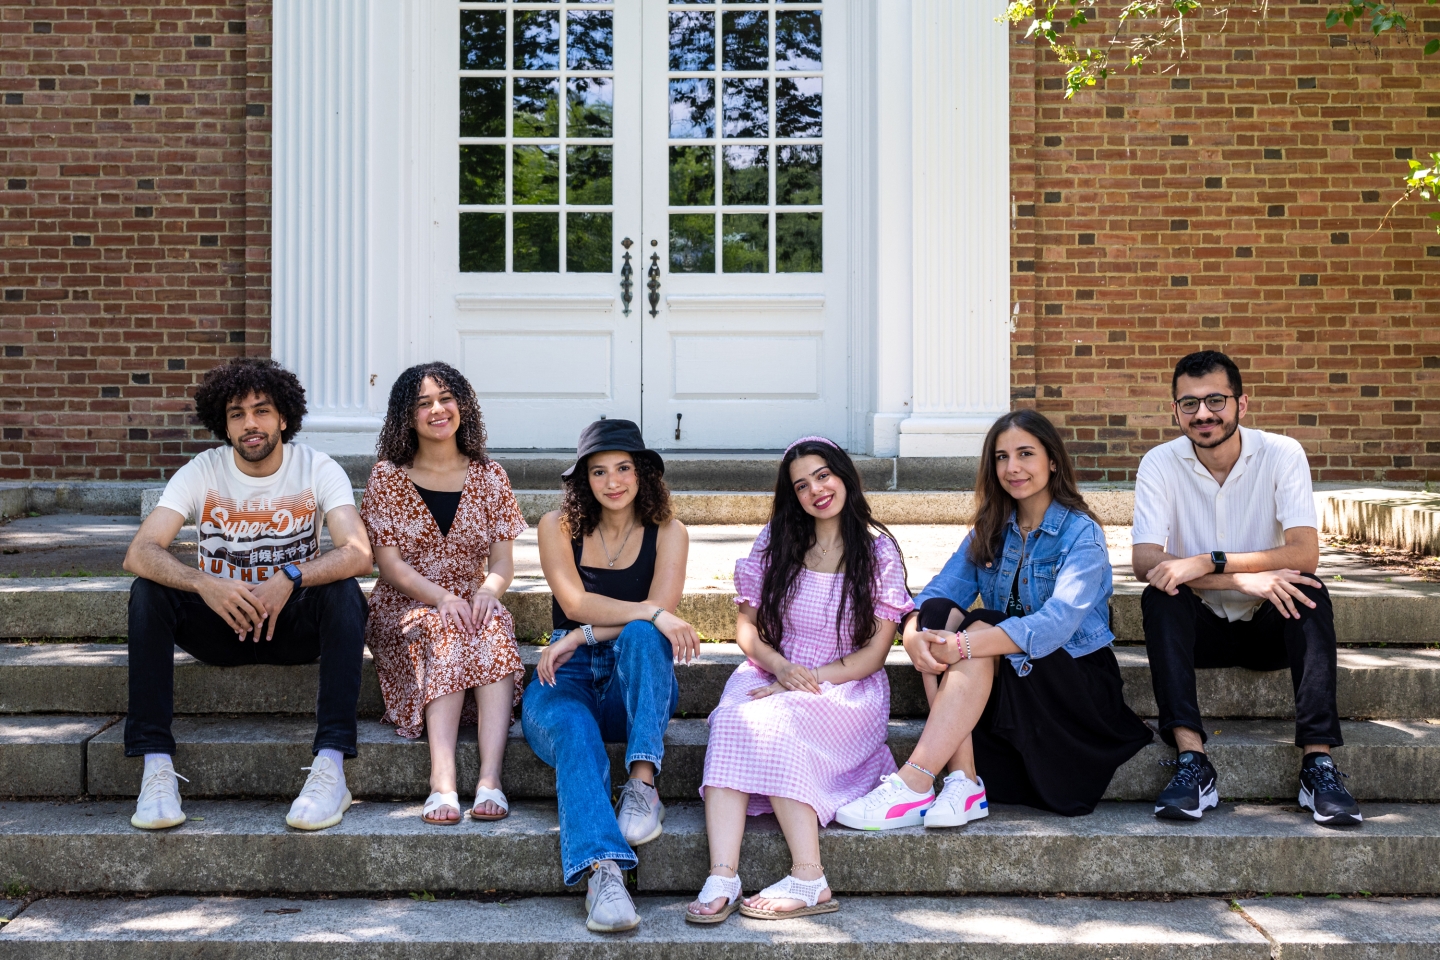 Here from the American University of Kuwait this summer are, from left, Omar Hedeya, Farida Mohamed, Taibah Al-Eissa, Abeer Kablaoui, Farah Hassan Saad, and Ali Darwiche. (Photo by Lars Blackmore)